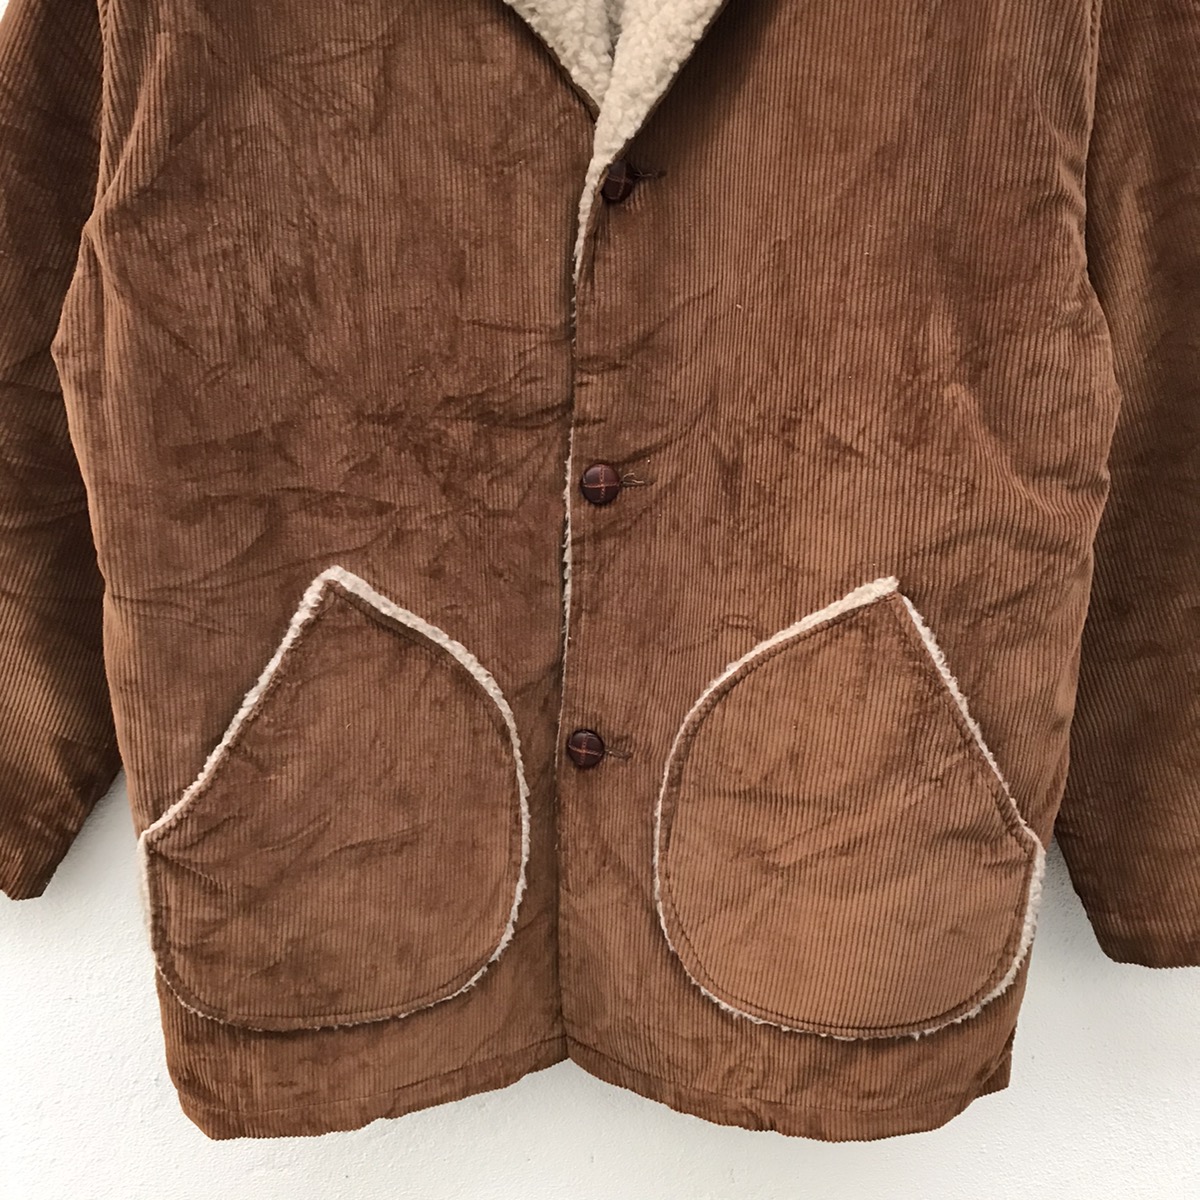 Vintage - Canyon Guide Outfitters Corduroy Jackets - 2